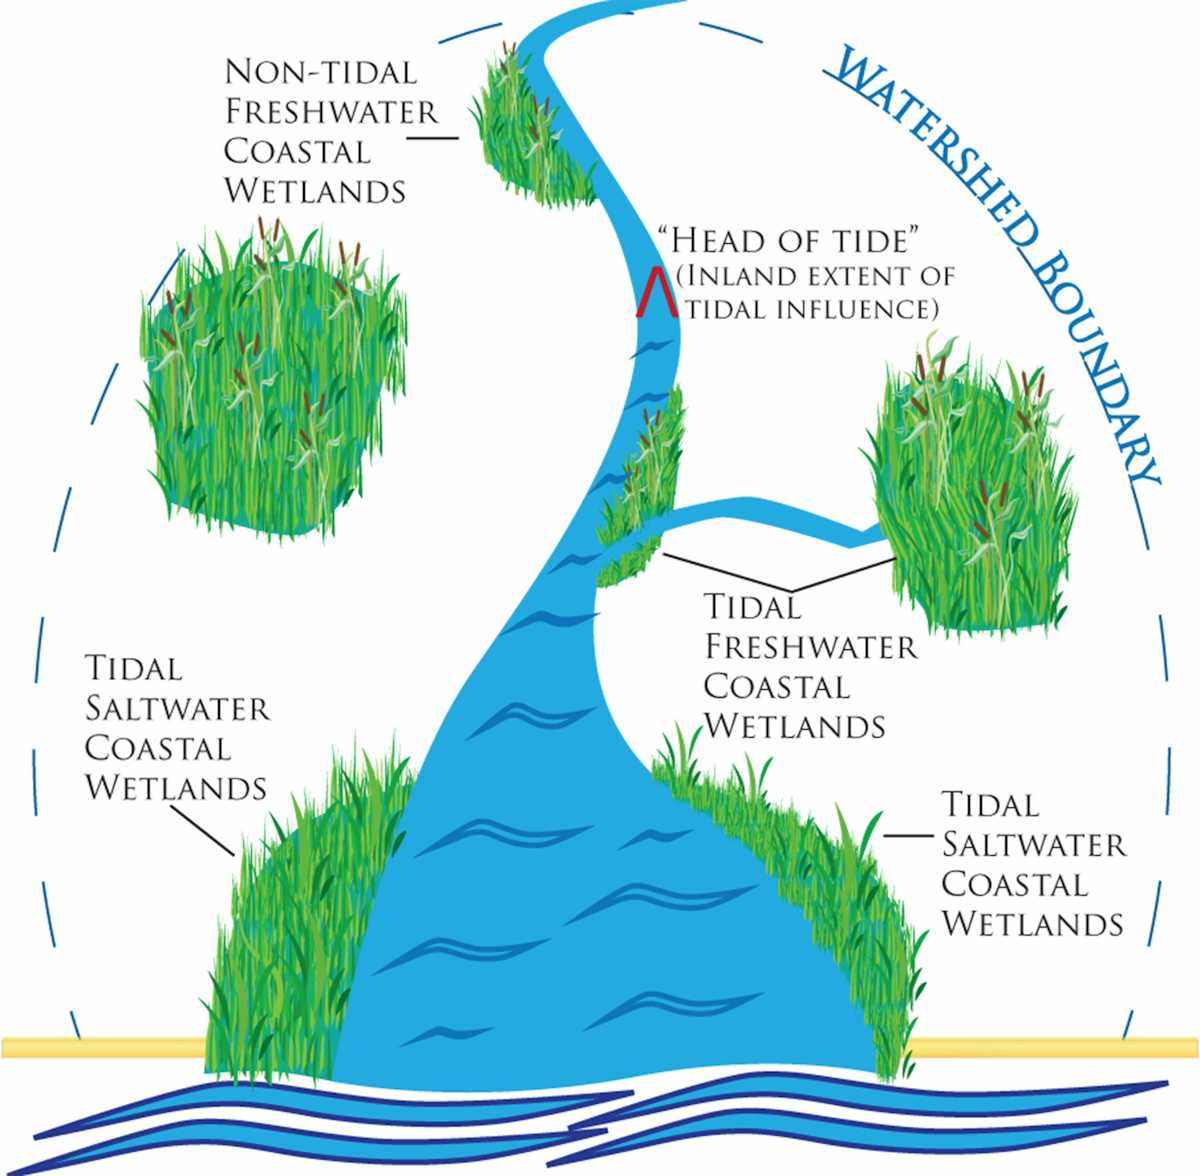 Coastal wetlands can extend well inland, transitioning from saltwater to br...